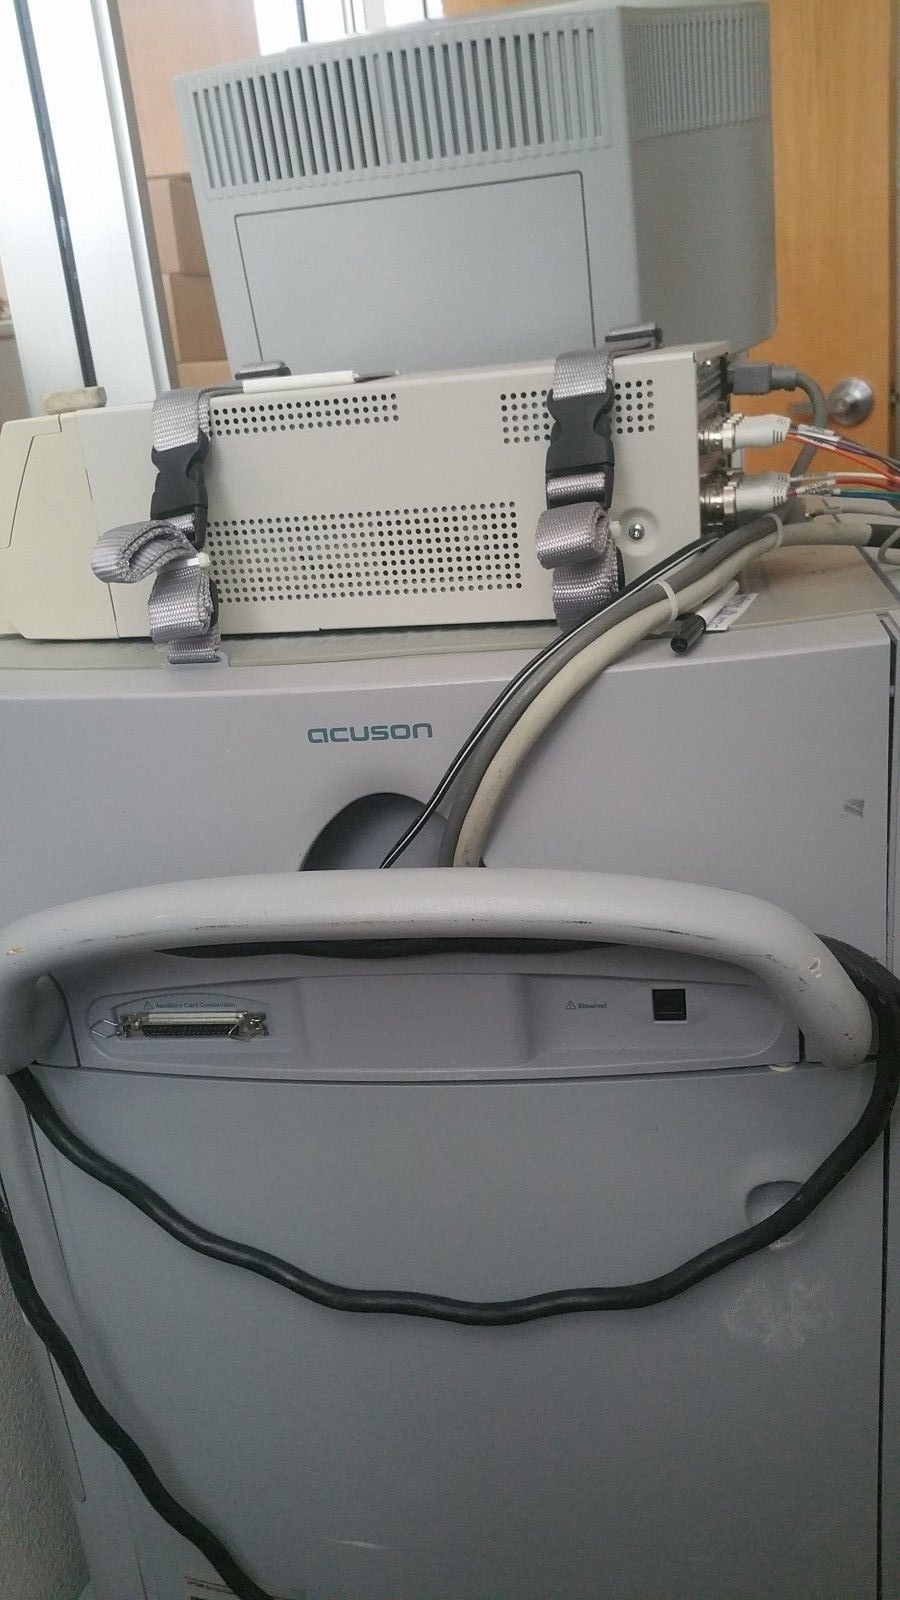 Acuson Sequoia 512 Ultrasound with 4 Probes DIAGNOSTIC ULTRASOUND MACHINES FOR SALE